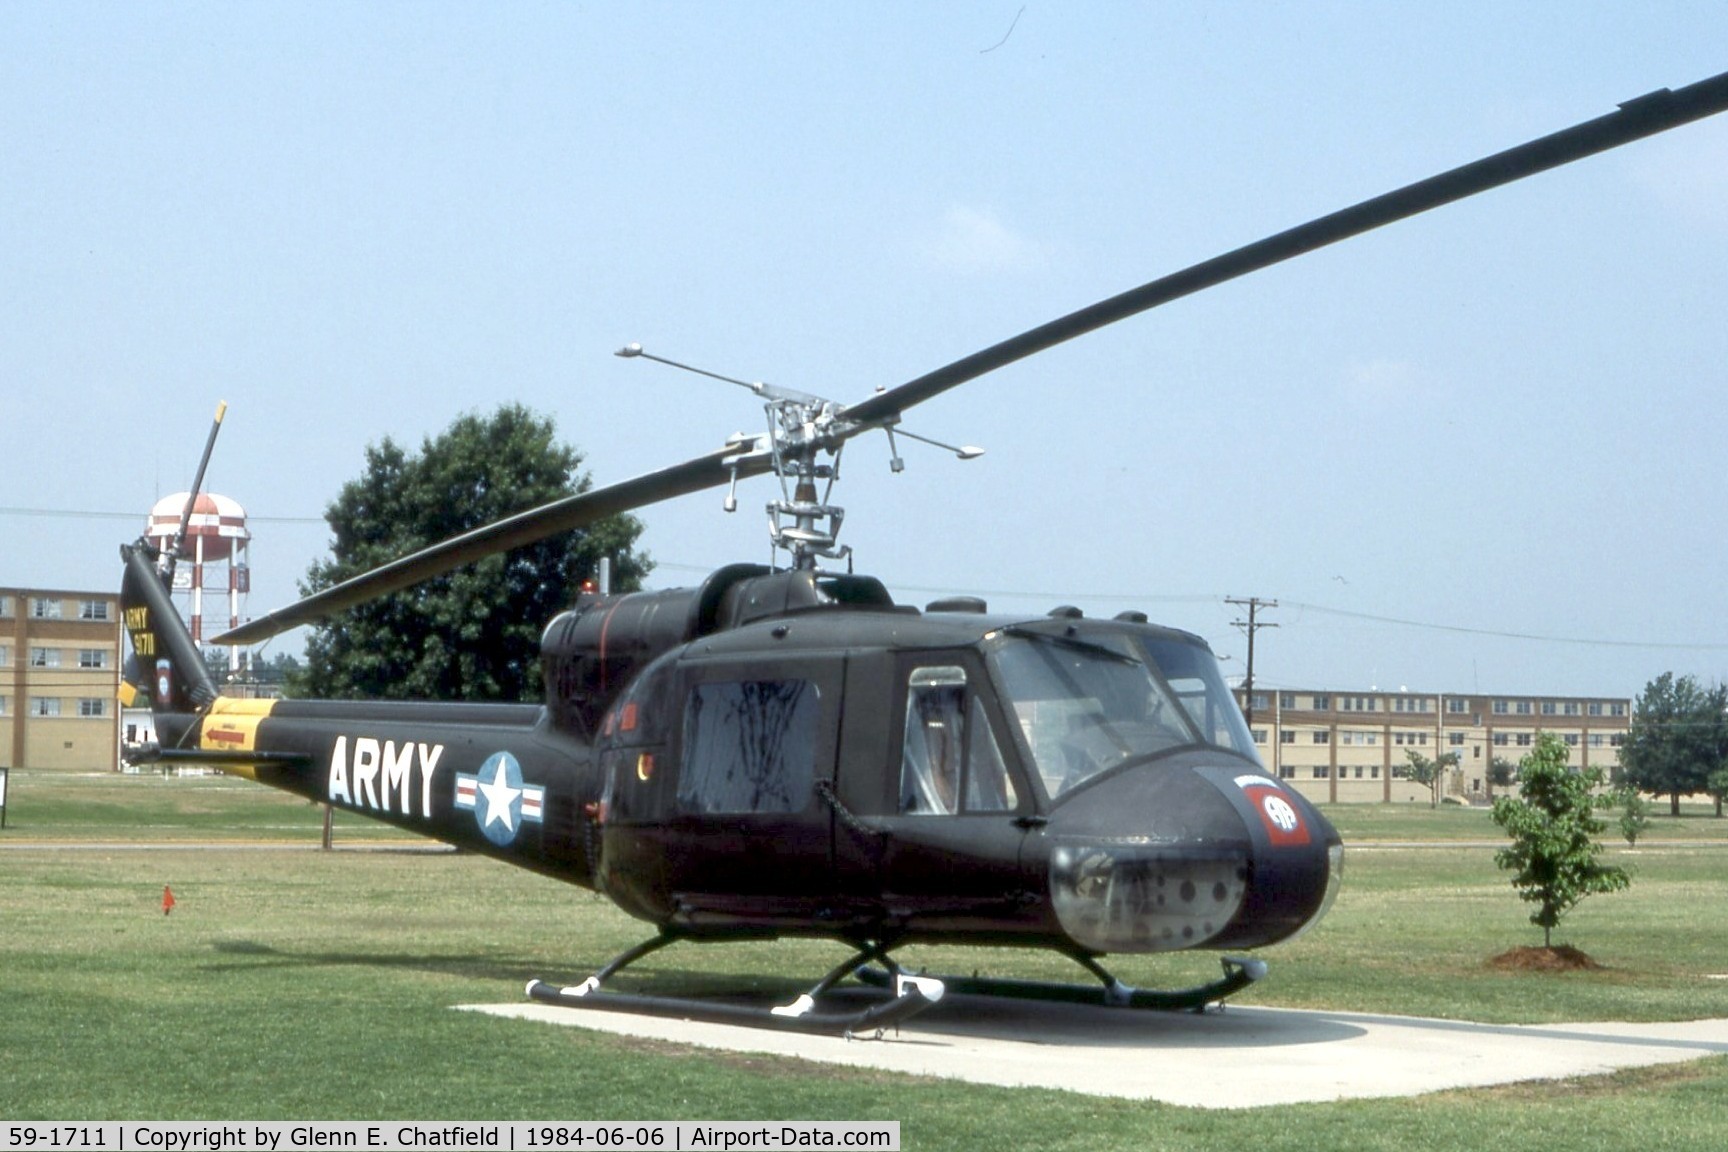 59-1711, 1959 Bell UH-1A Iroquois C/N 170, UH-1A at the 82nd Airborne Division Museum, Ft. Bragg, NC